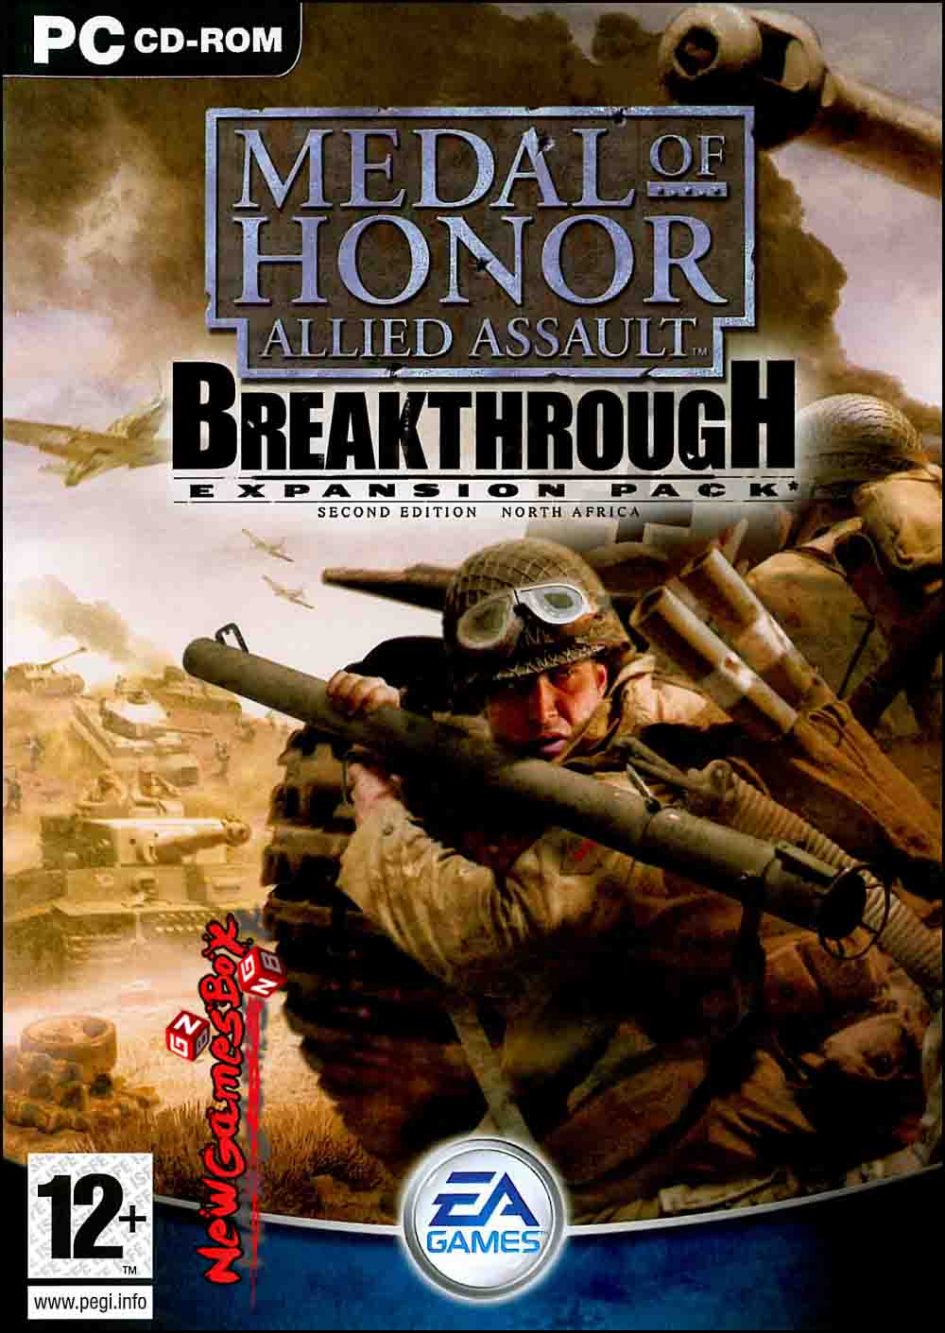 Medal of Honor Allied Assault - Breakthrough Free Download